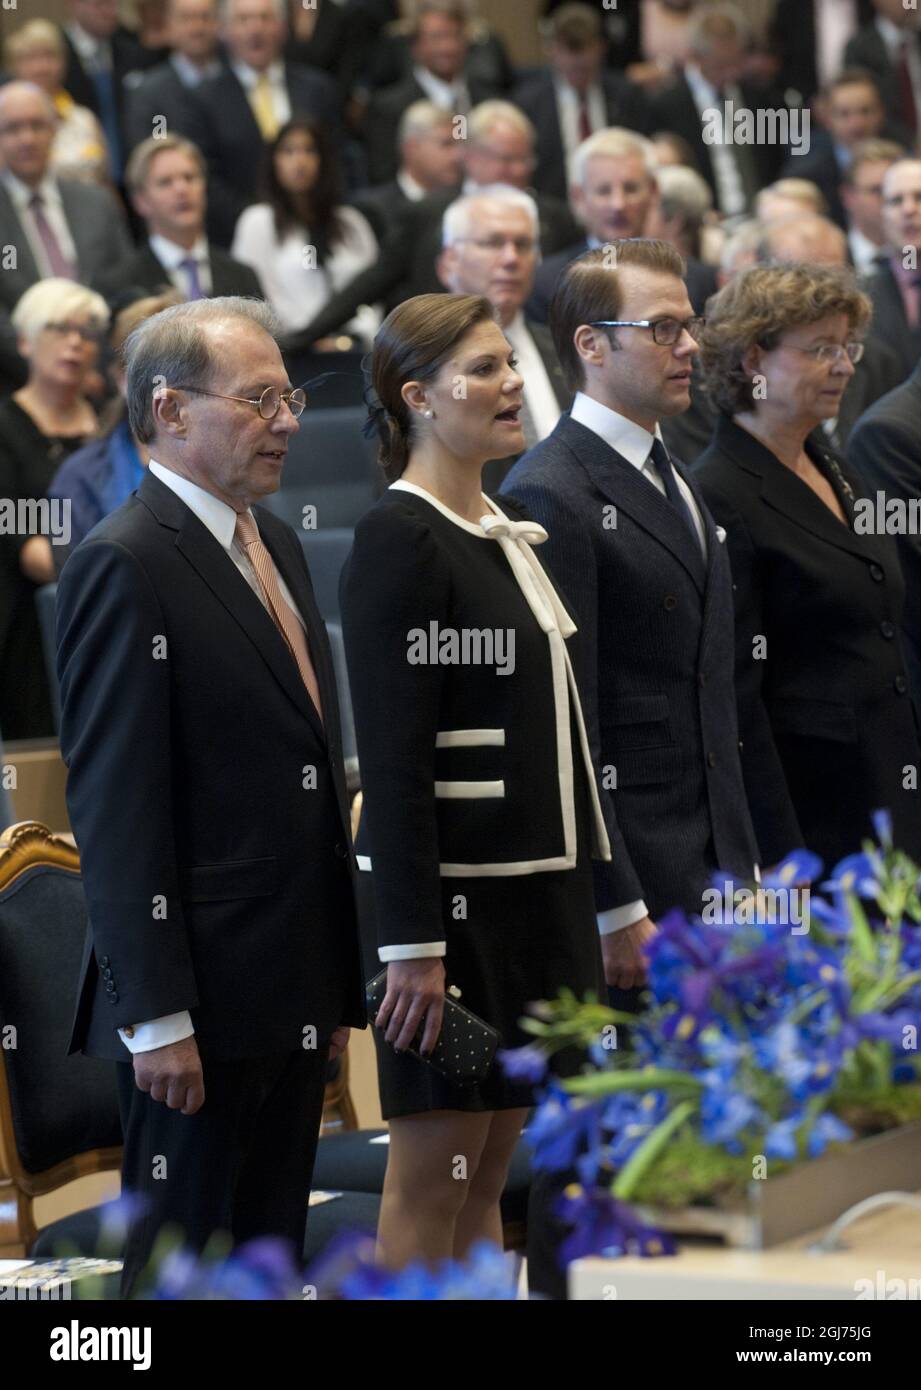 The Speaker of the Parliament, Per Westerberg, Crown Princess Victoria and Prince Daniel during the opening of the House of the Parliament in Stockholm, Sweden, September 15, 2011. Stock Photo